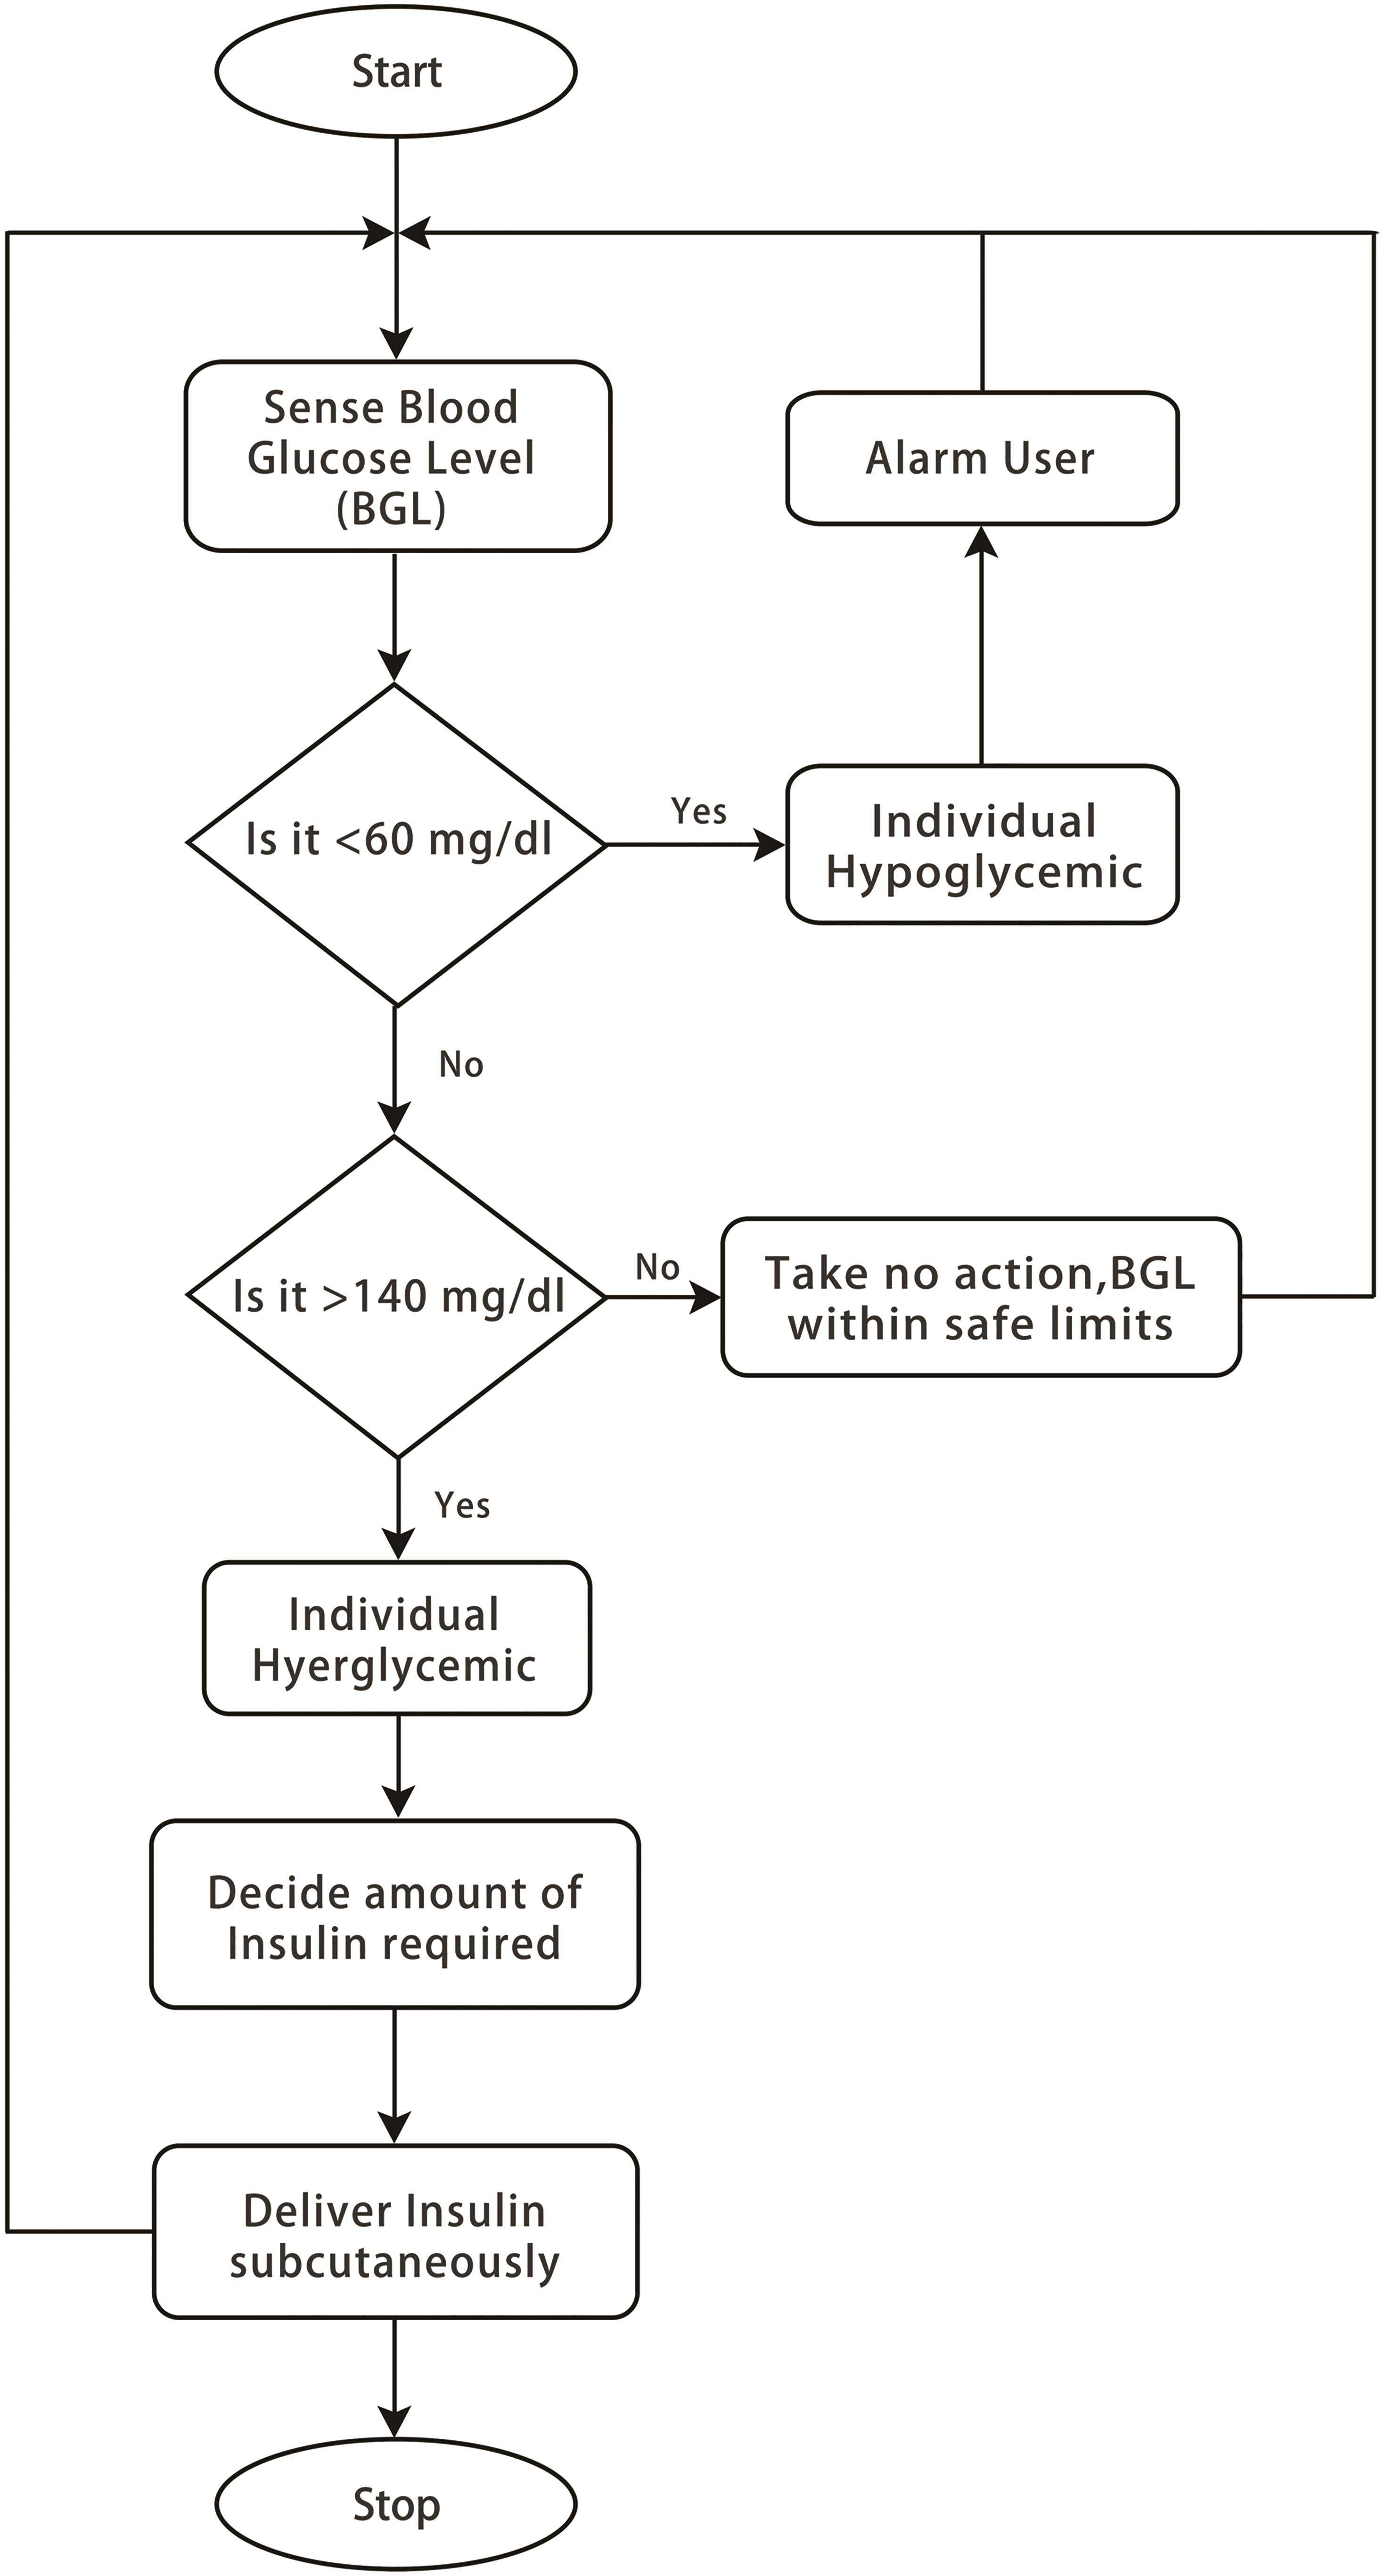 Flowchart describing the algorithm being followed by the controller to determine the amount of insulin required.